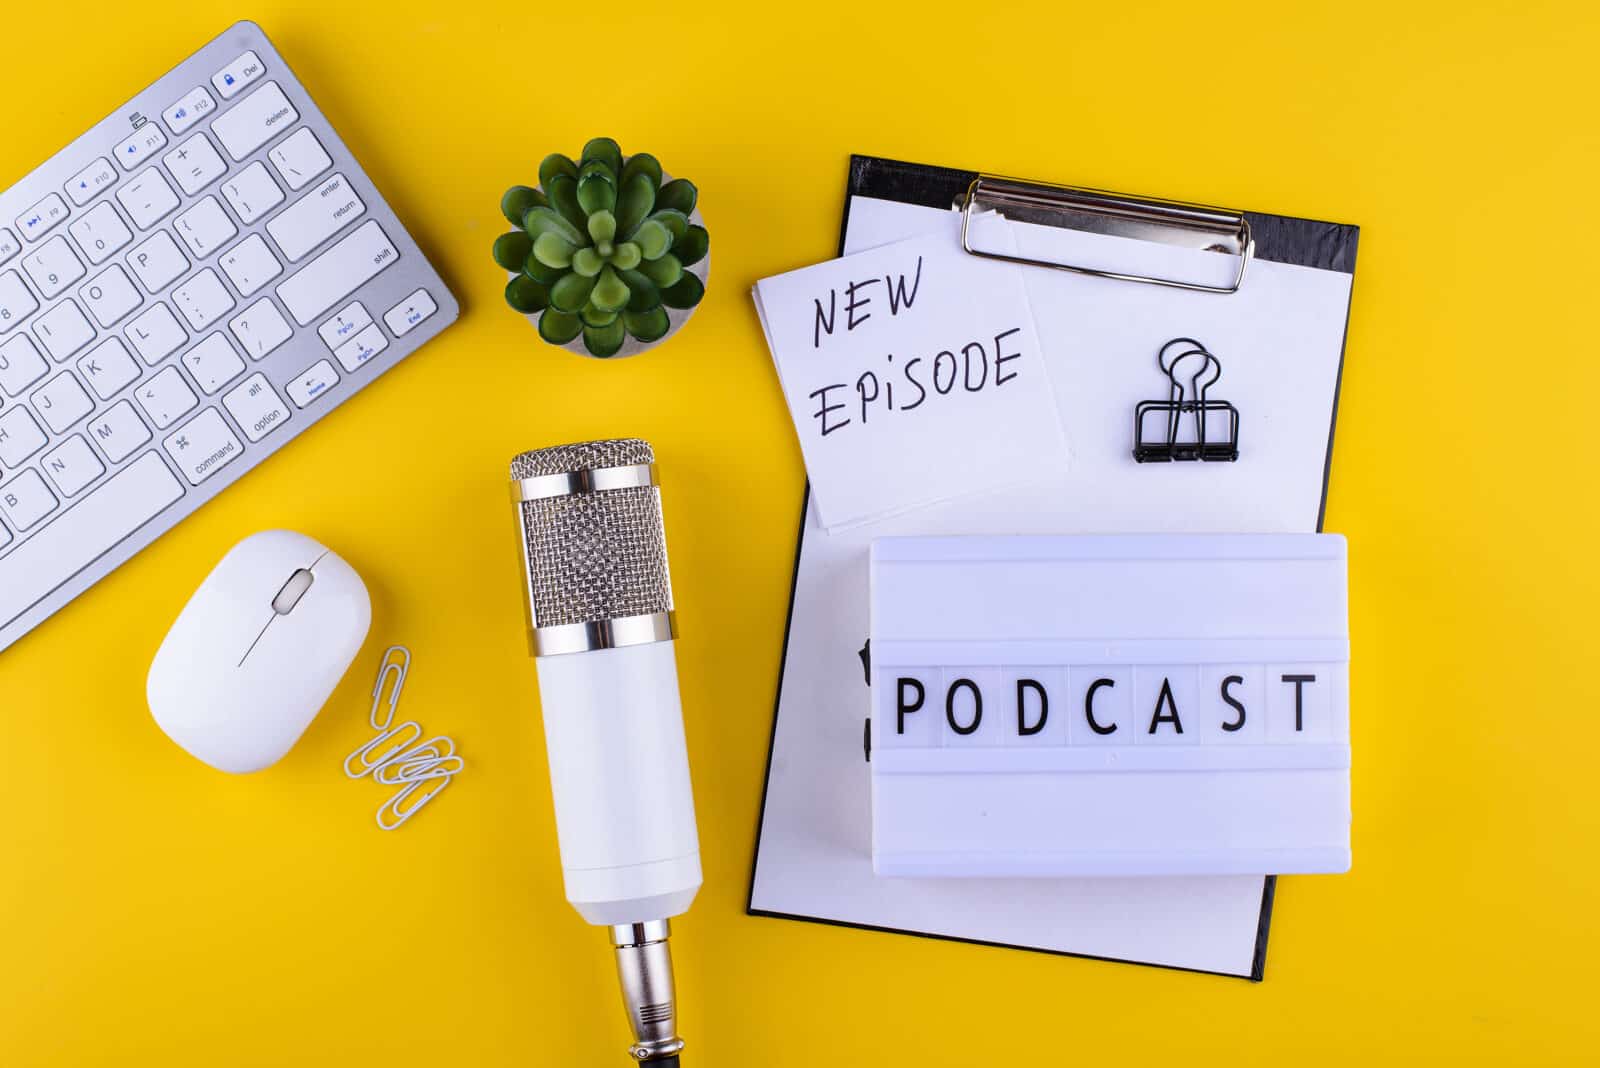 Podcast new episode concept. Workplace desk of blogger or podcaster with microphone